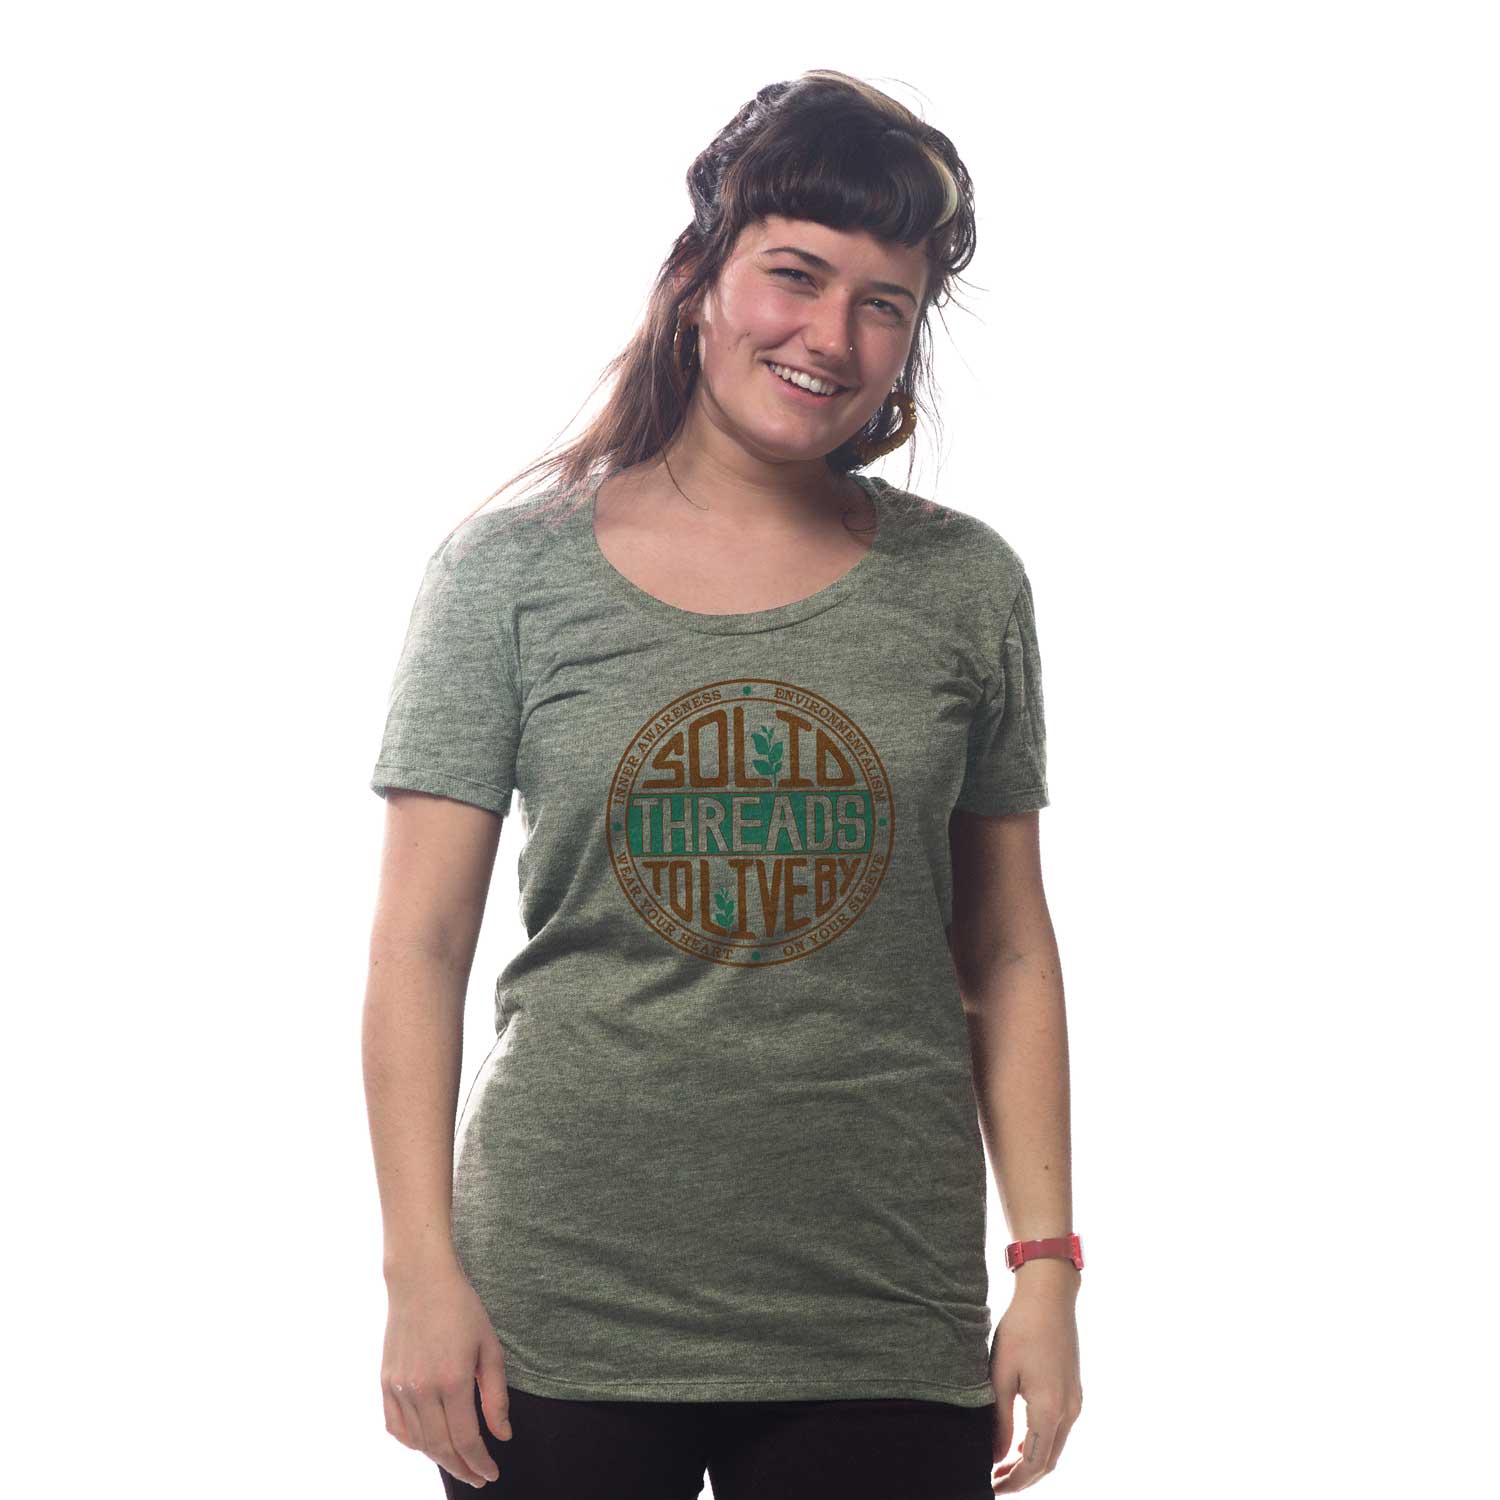 Women's Solid Threads To Live By Vintage Graphic Tee | Cool Eco T-Shirt on Model |  | Solid Threads